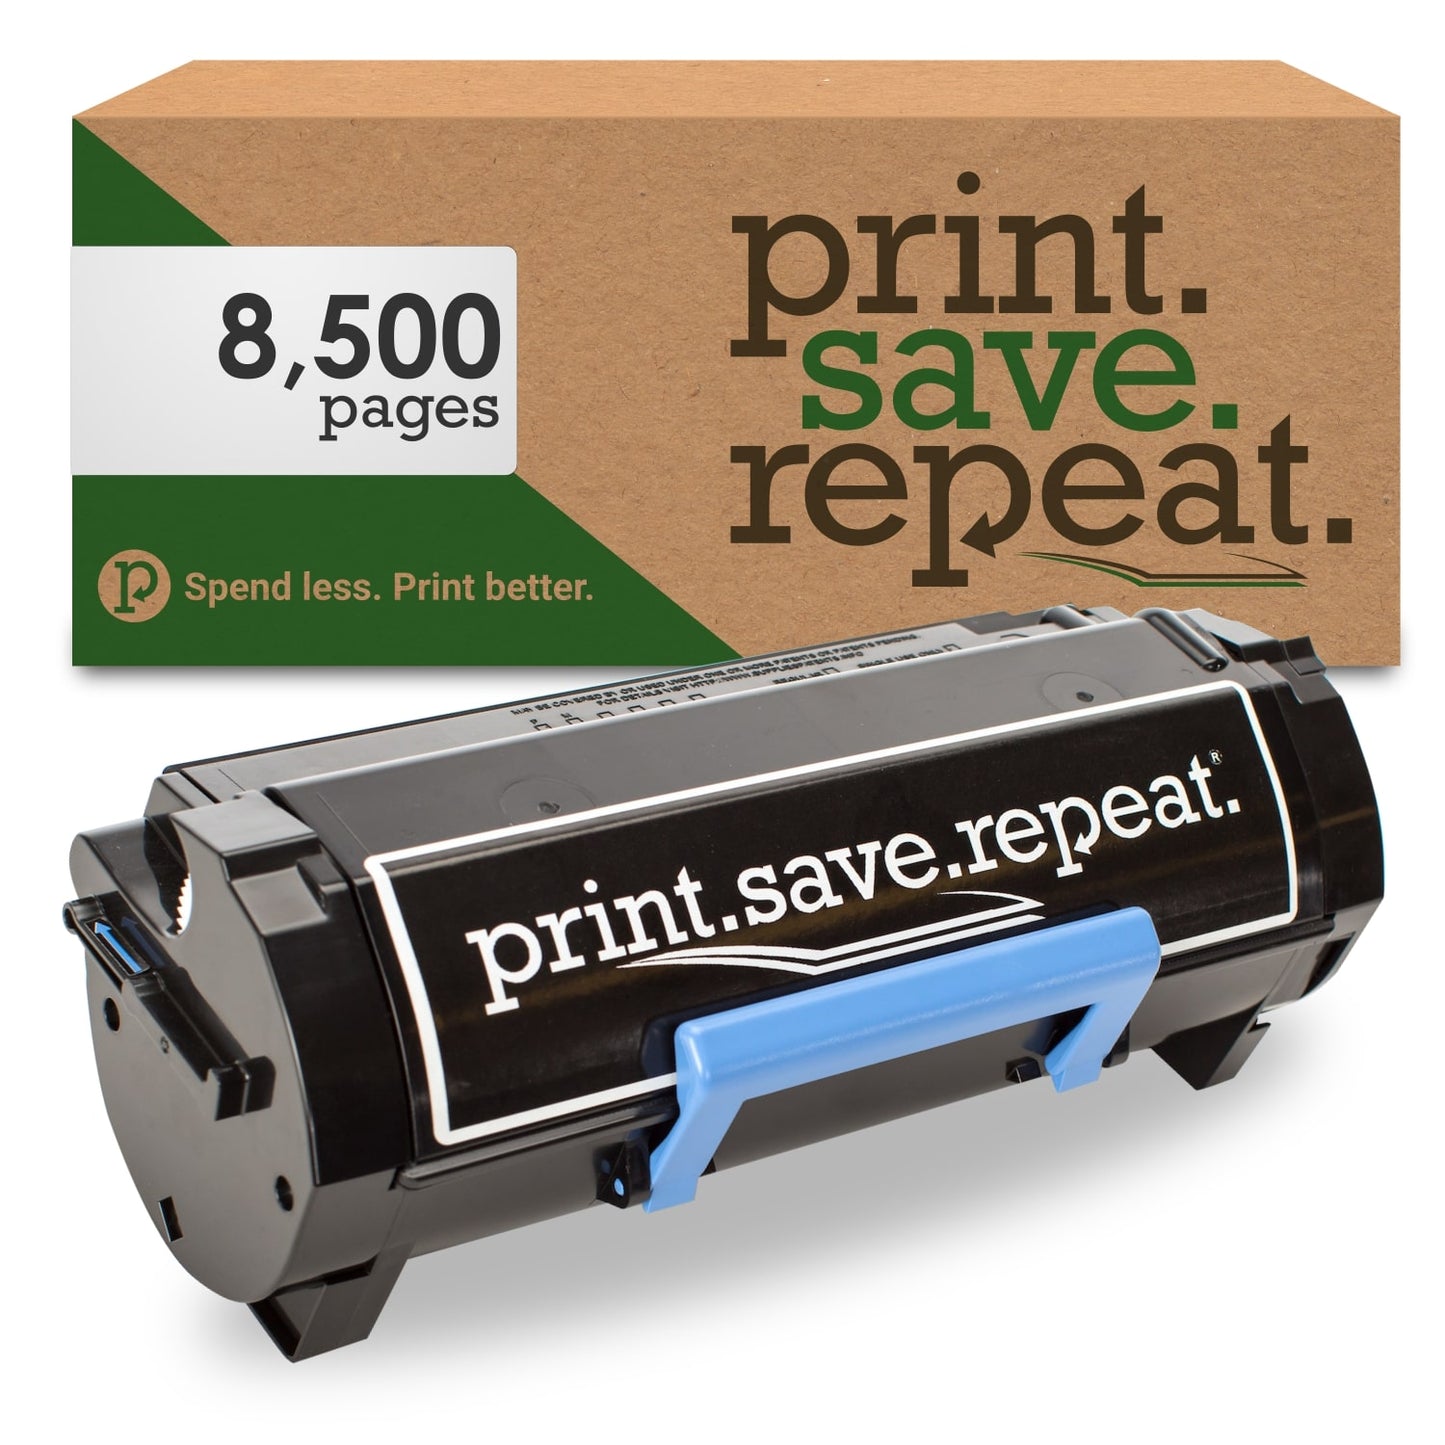 Print.Save.Repeat. Dell GGCTW High Yield Remanufactured Toner Cartridge for S2830 [8,500 Pages]